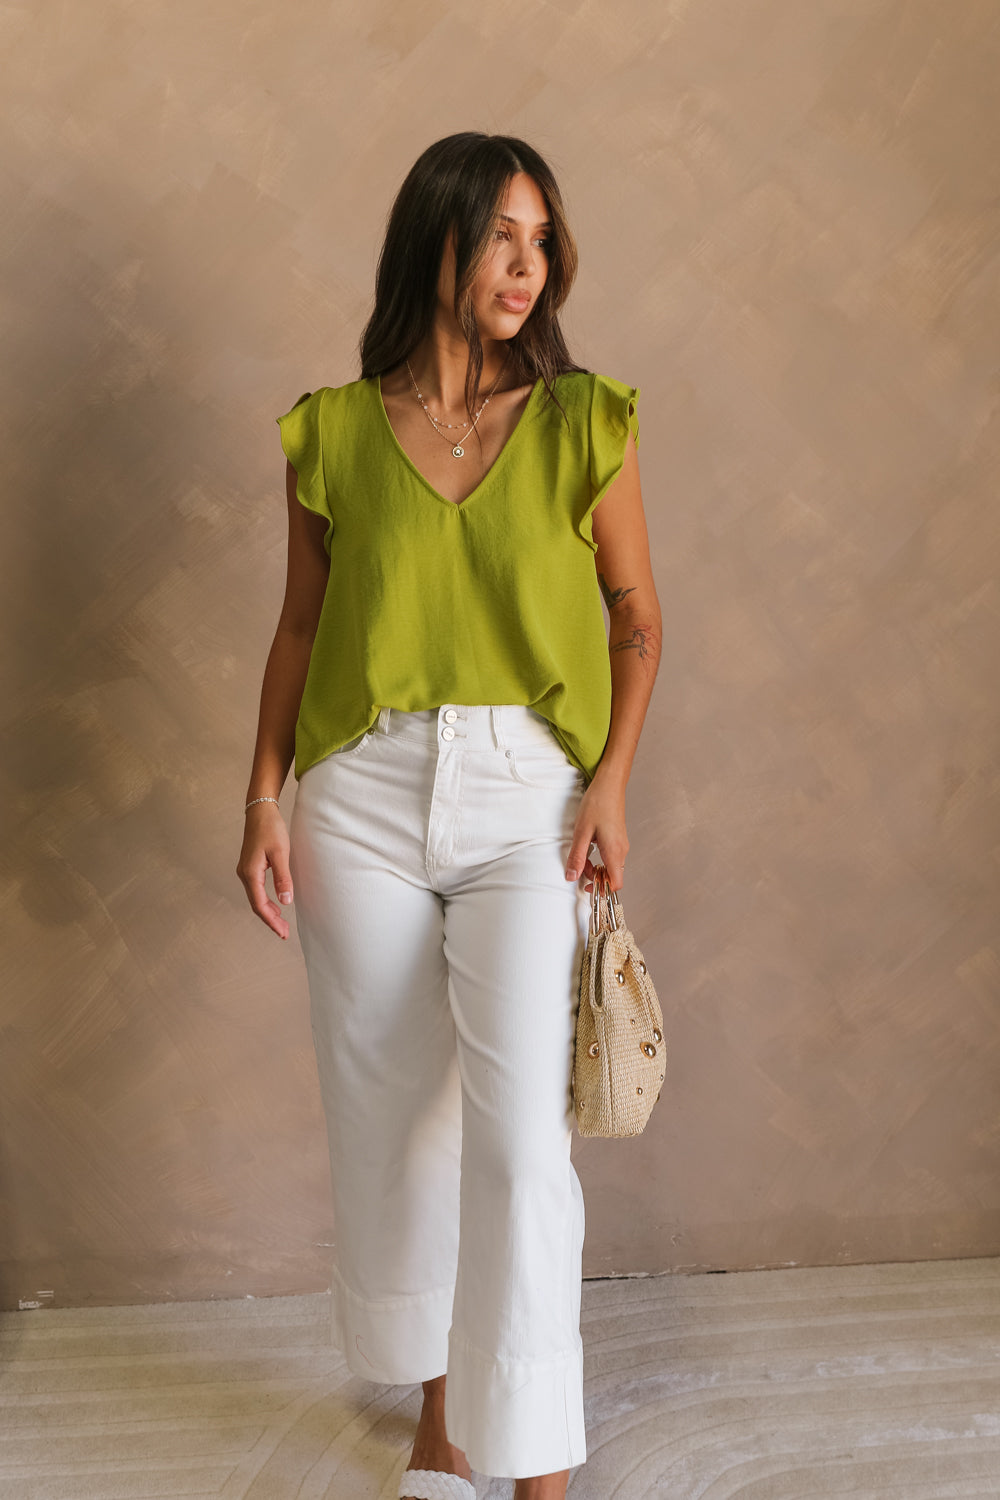 Full body front view of female model wearing the Marceline Chartreuse Ruffled Top that has bright chartreuse green fabric, ruffled sleeve trim, and a v neck. Top is front tucked